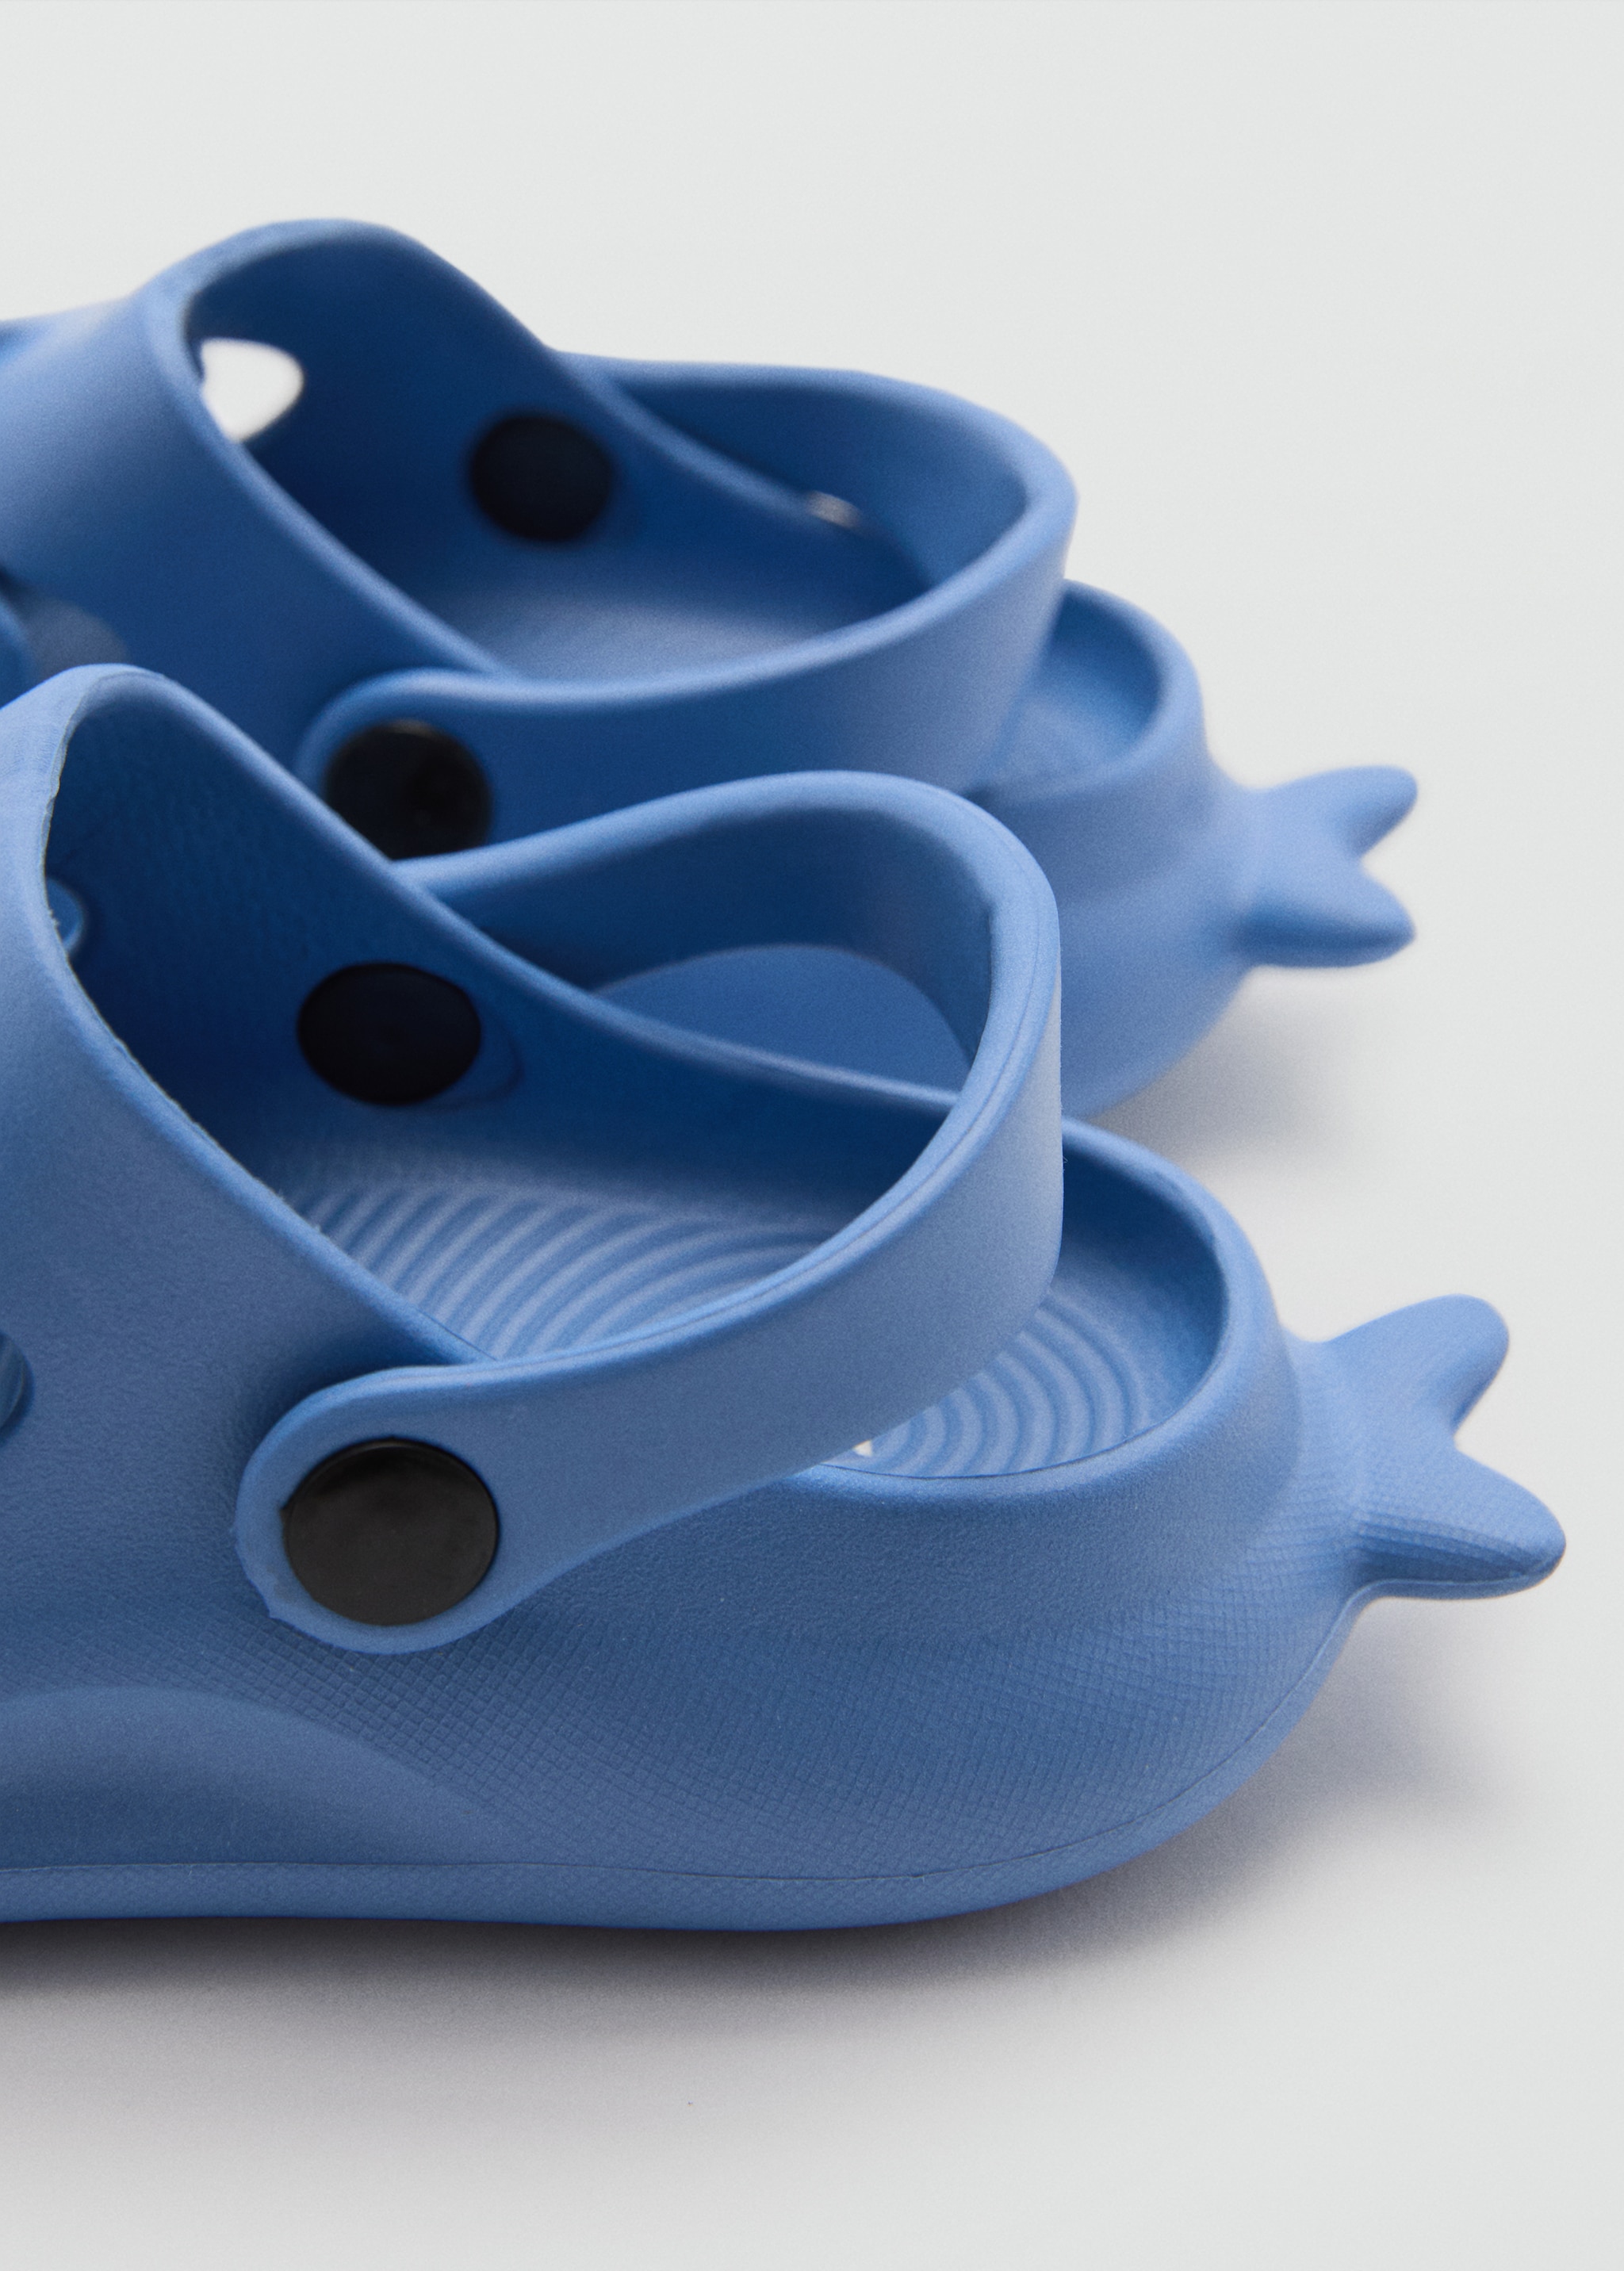 Rubber clogs - Details of the article 1